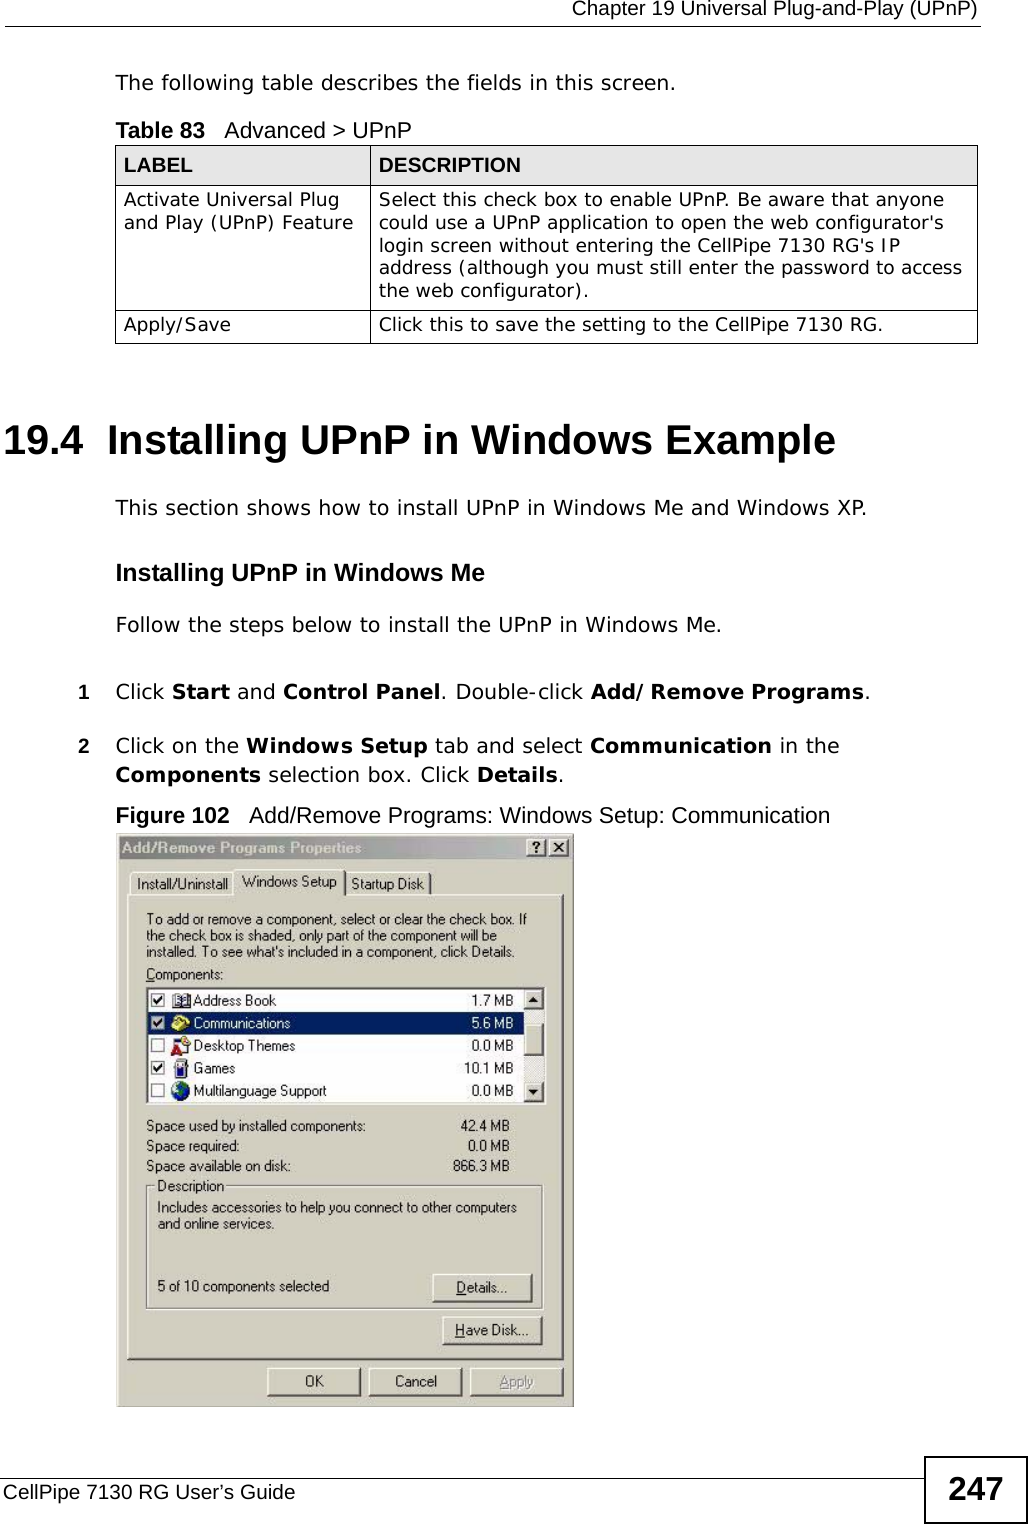  Chapter 19 Universal Plug-and-Play (UPnP)CellPipe 7130 RG User’s Guide 247The following table describes the fields in this screen. 19.4  Installing UPnP in Windows ExampleThis section shows how to install UPnP in Windows Me and Windows XP. Installing UPnP in Windows MeFollow the steps below to install the UPnP in Windows Me. 1Click Start and Control Panel. Double-click Add/Remove Programs.2Click on the Windows Setup tab and select Communication in the Components selection box. Click Details. Figure 102   Add/Remove Programs: Windows Setup: Communication Table 83   Advanced &gt; UPnPLABEL DESCRIPTIONActivate Universal Plug and Play (UPnP) Feature Select this check box to enable UPnP. Be aware that anyone could use a UPnP application to open the web configurator&apos;s login screen without entering the CellPipe 7130 RG&apos;s IP address (although you must still enter the password to access the web configurator).Apply/Save Click this to save the setting to the CellPipe 7130 RG.